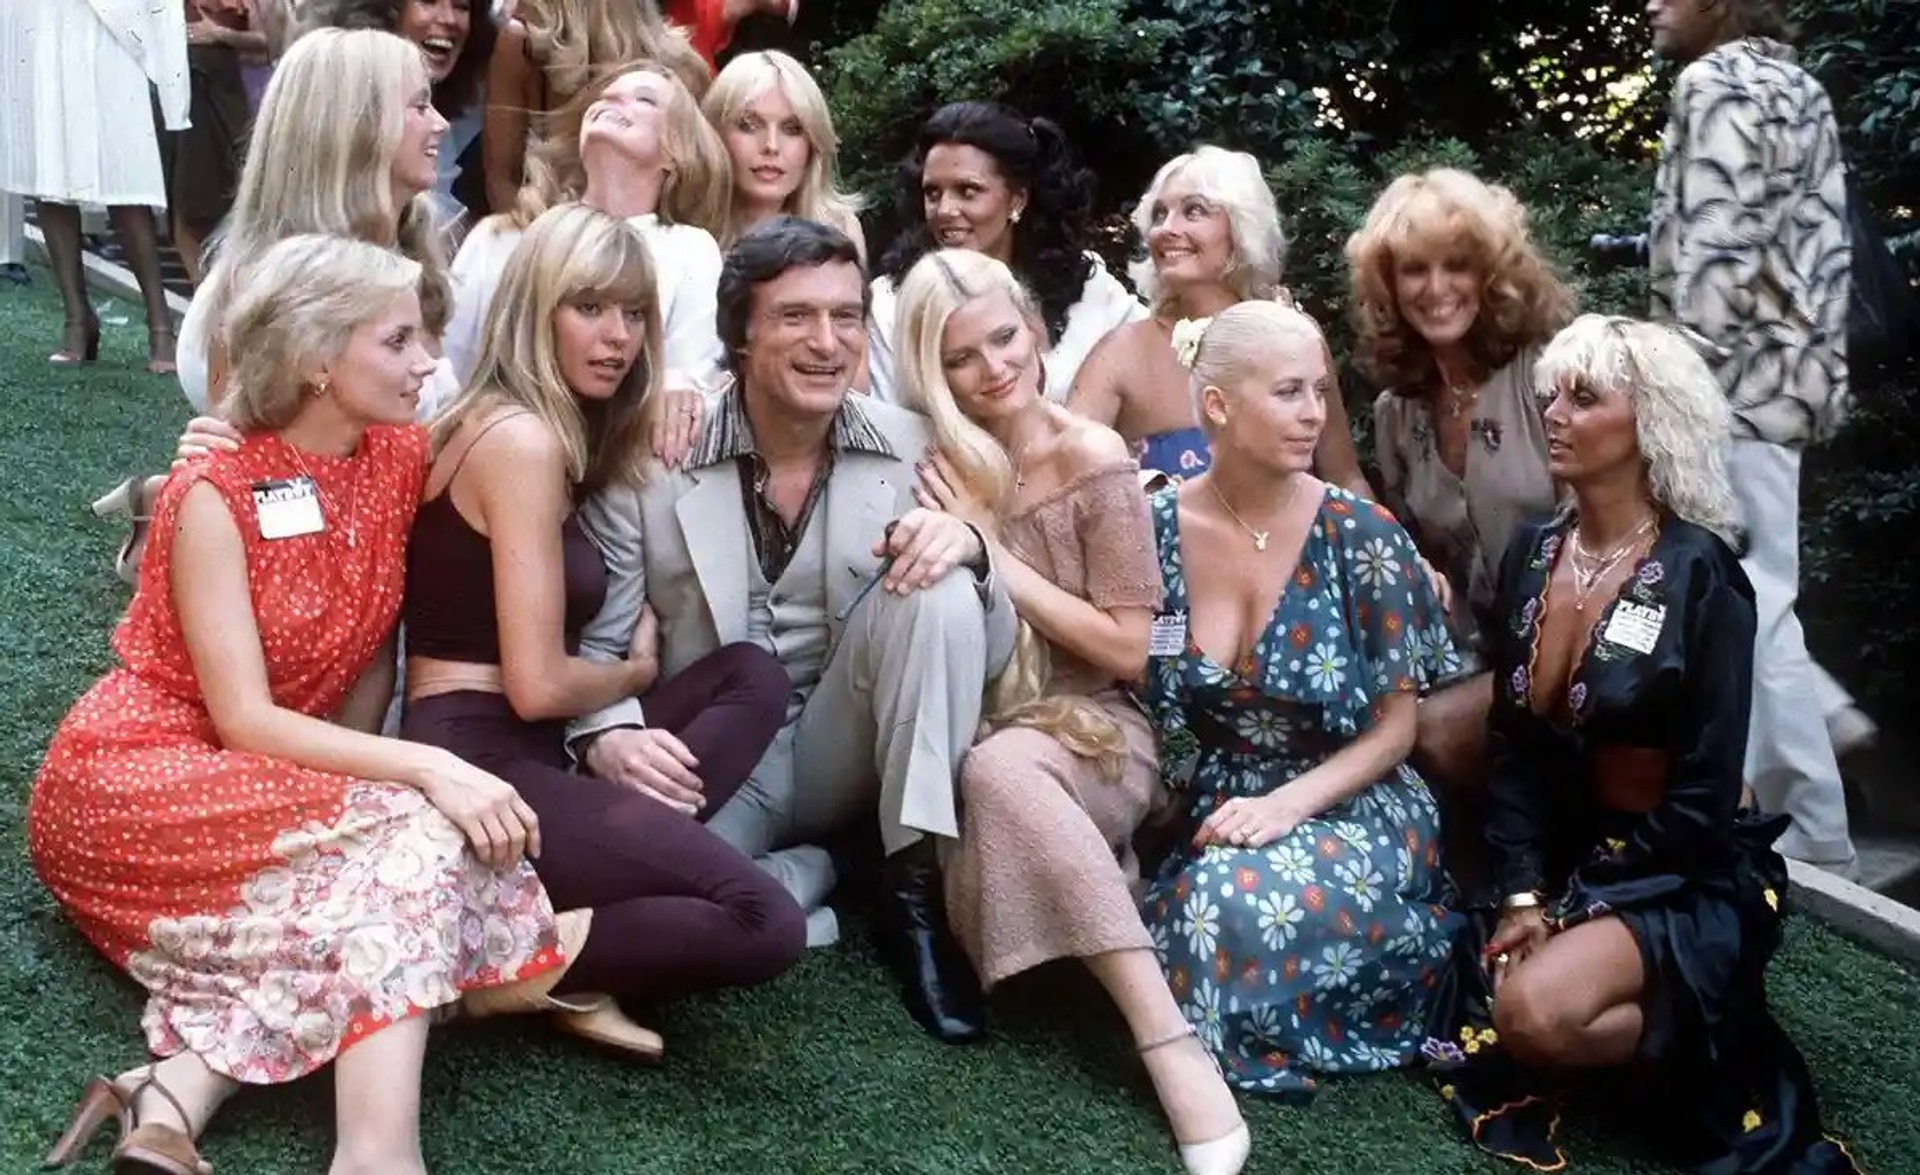 Hugh Hefner surrounded by Bunnies at Playboy Mansion, Los Angeles, CA., 1979 (Courtesy of Rex/Shutterstock)